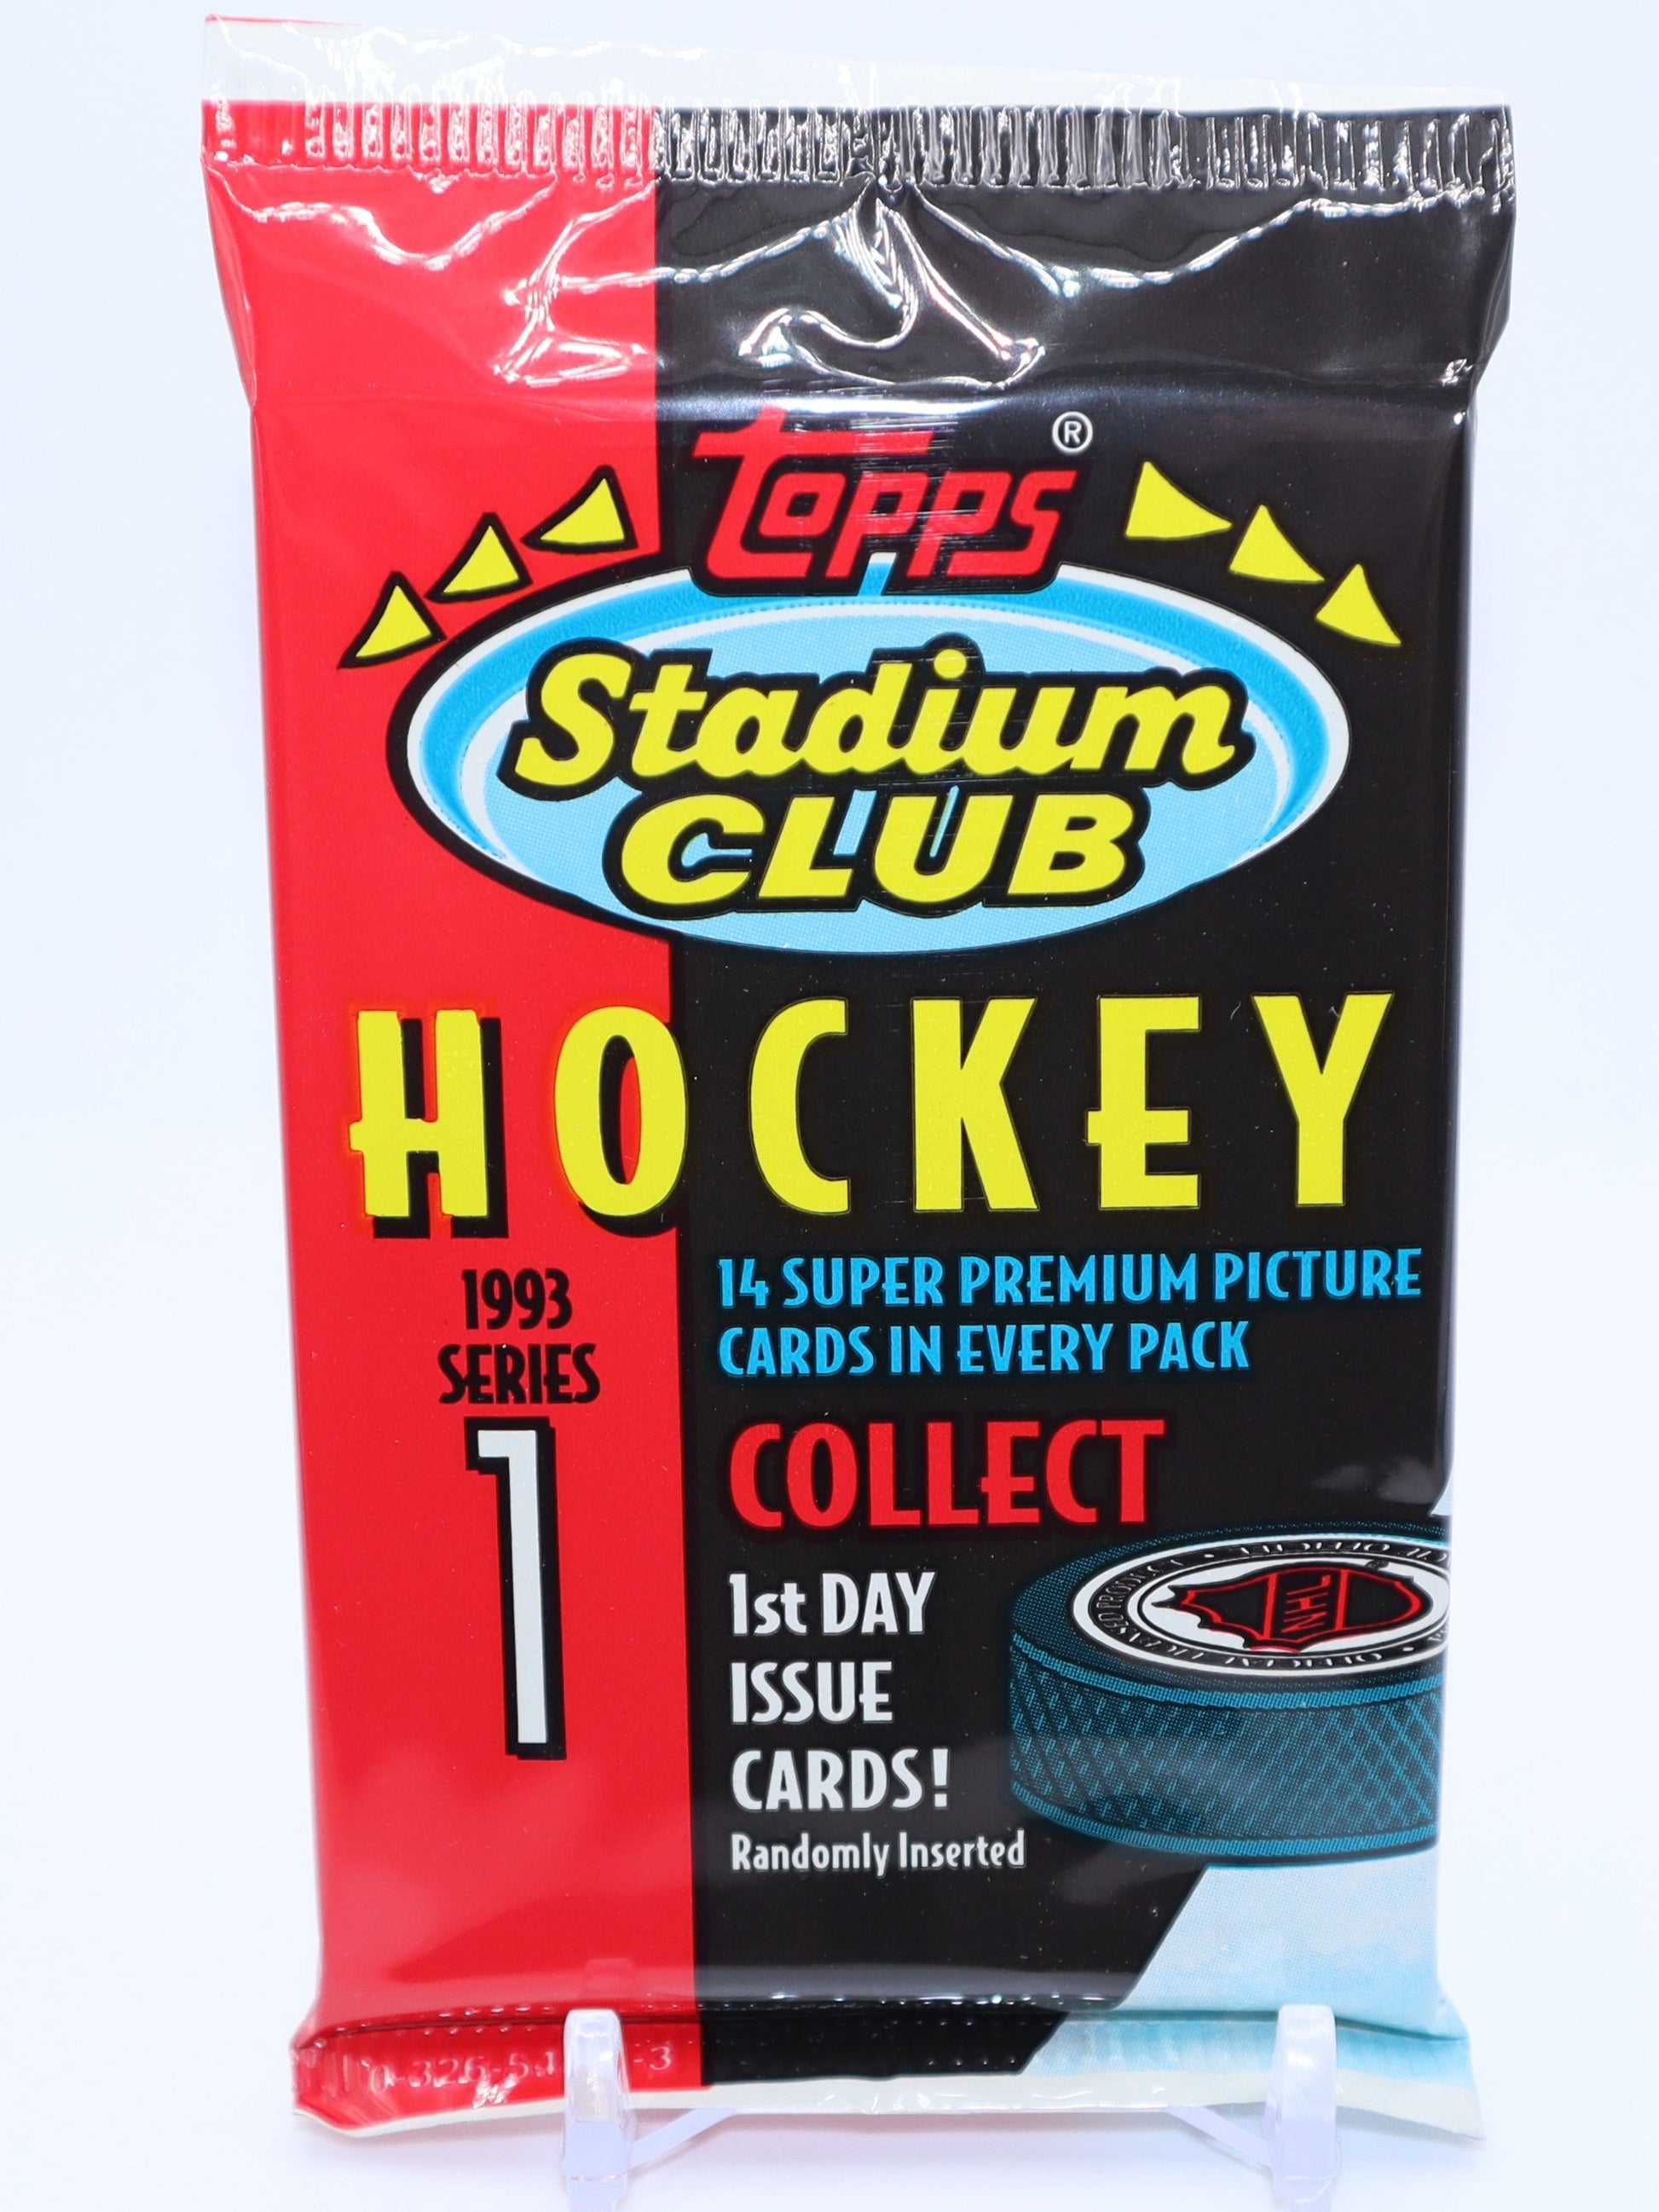 1993 Topps Stadium Club Series 1 Hockey Cards Wax Pack - Collectibles